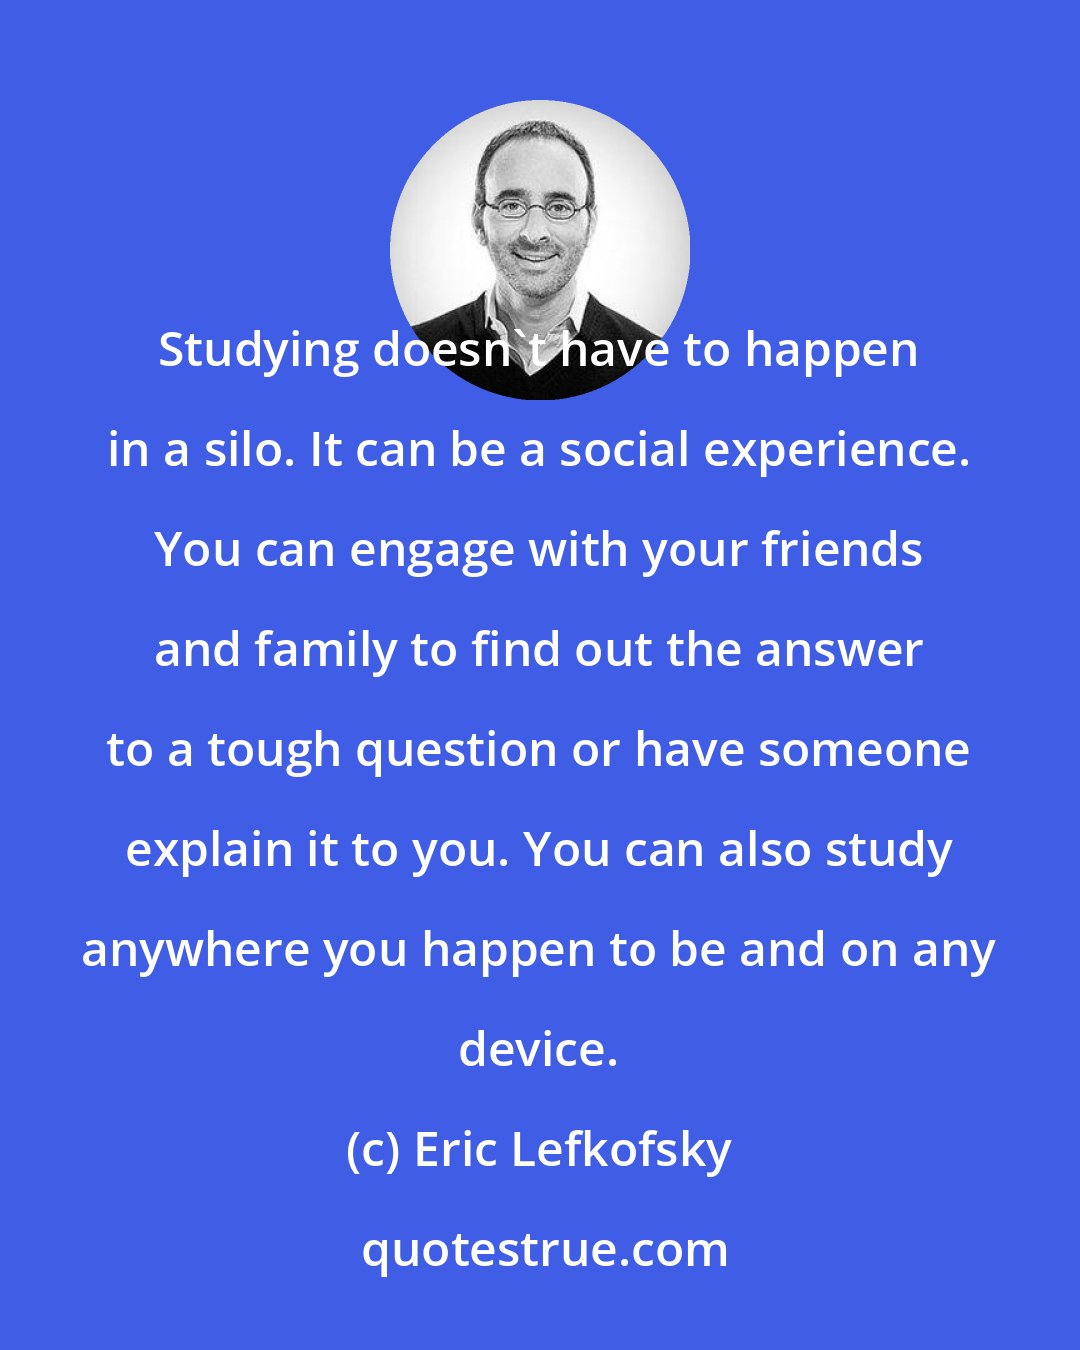 Eric Lefkofsky: Studying doesn't have to happen in a silo. It can be a social experience. You can engage with your friends and family to find out the answer to a tough question or have someone explain it to you. You can also study anywhere you happen to be and on any device.